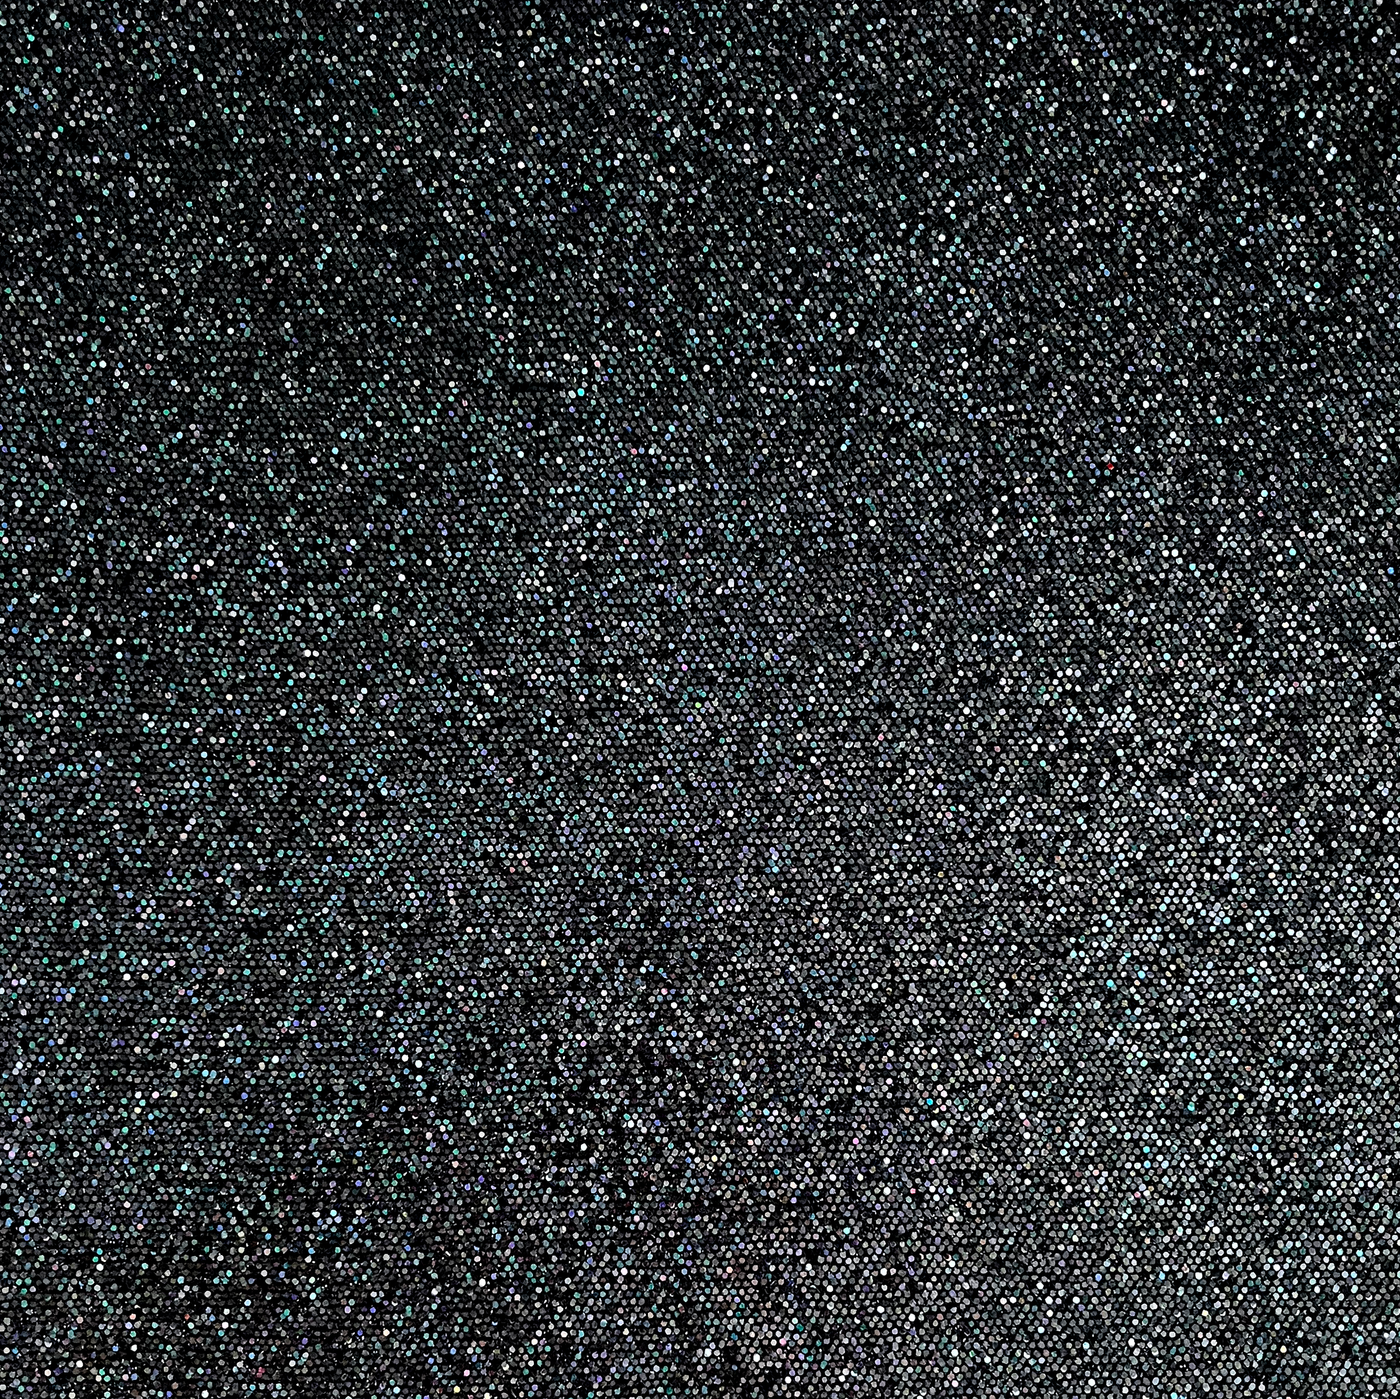 Black Glitter Card Stock for die cutting, holiday cards, and invitations -  CutCardStock